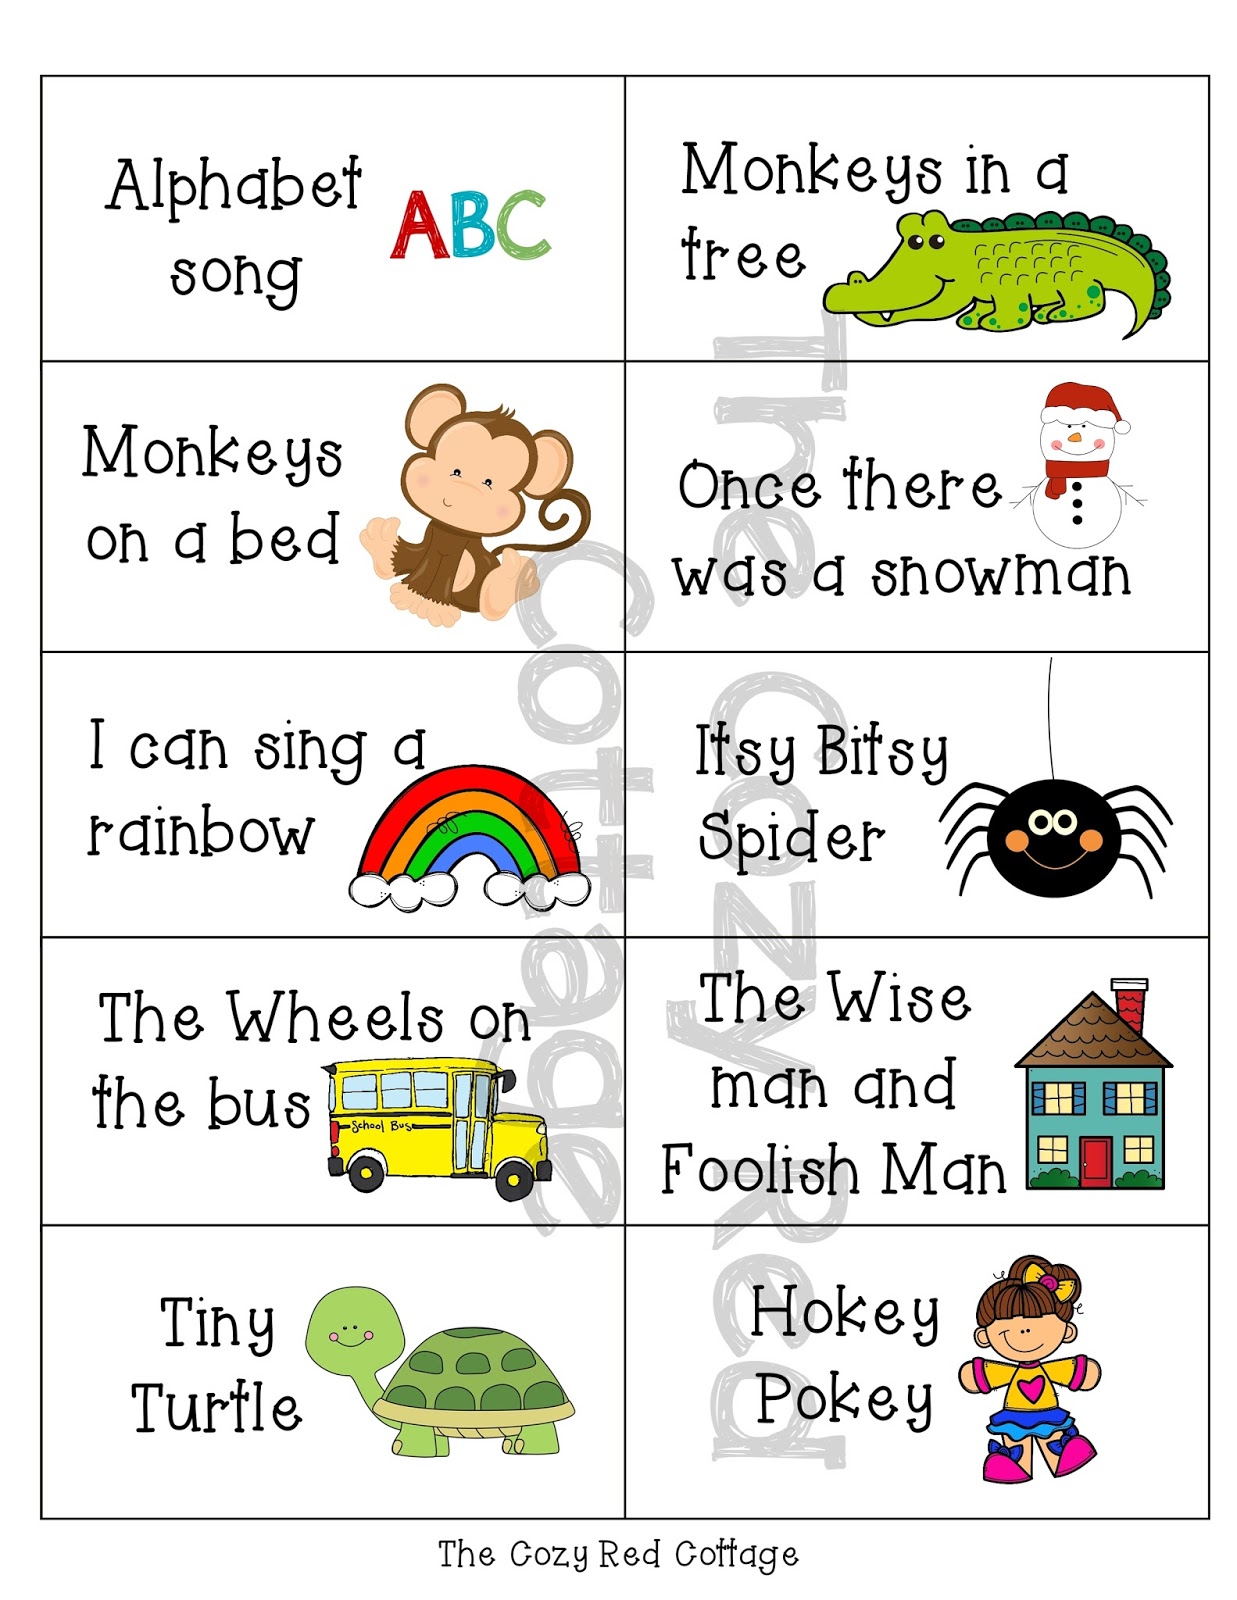 the-cozy-red-cottage-30-preschool-song-cards-free-printables